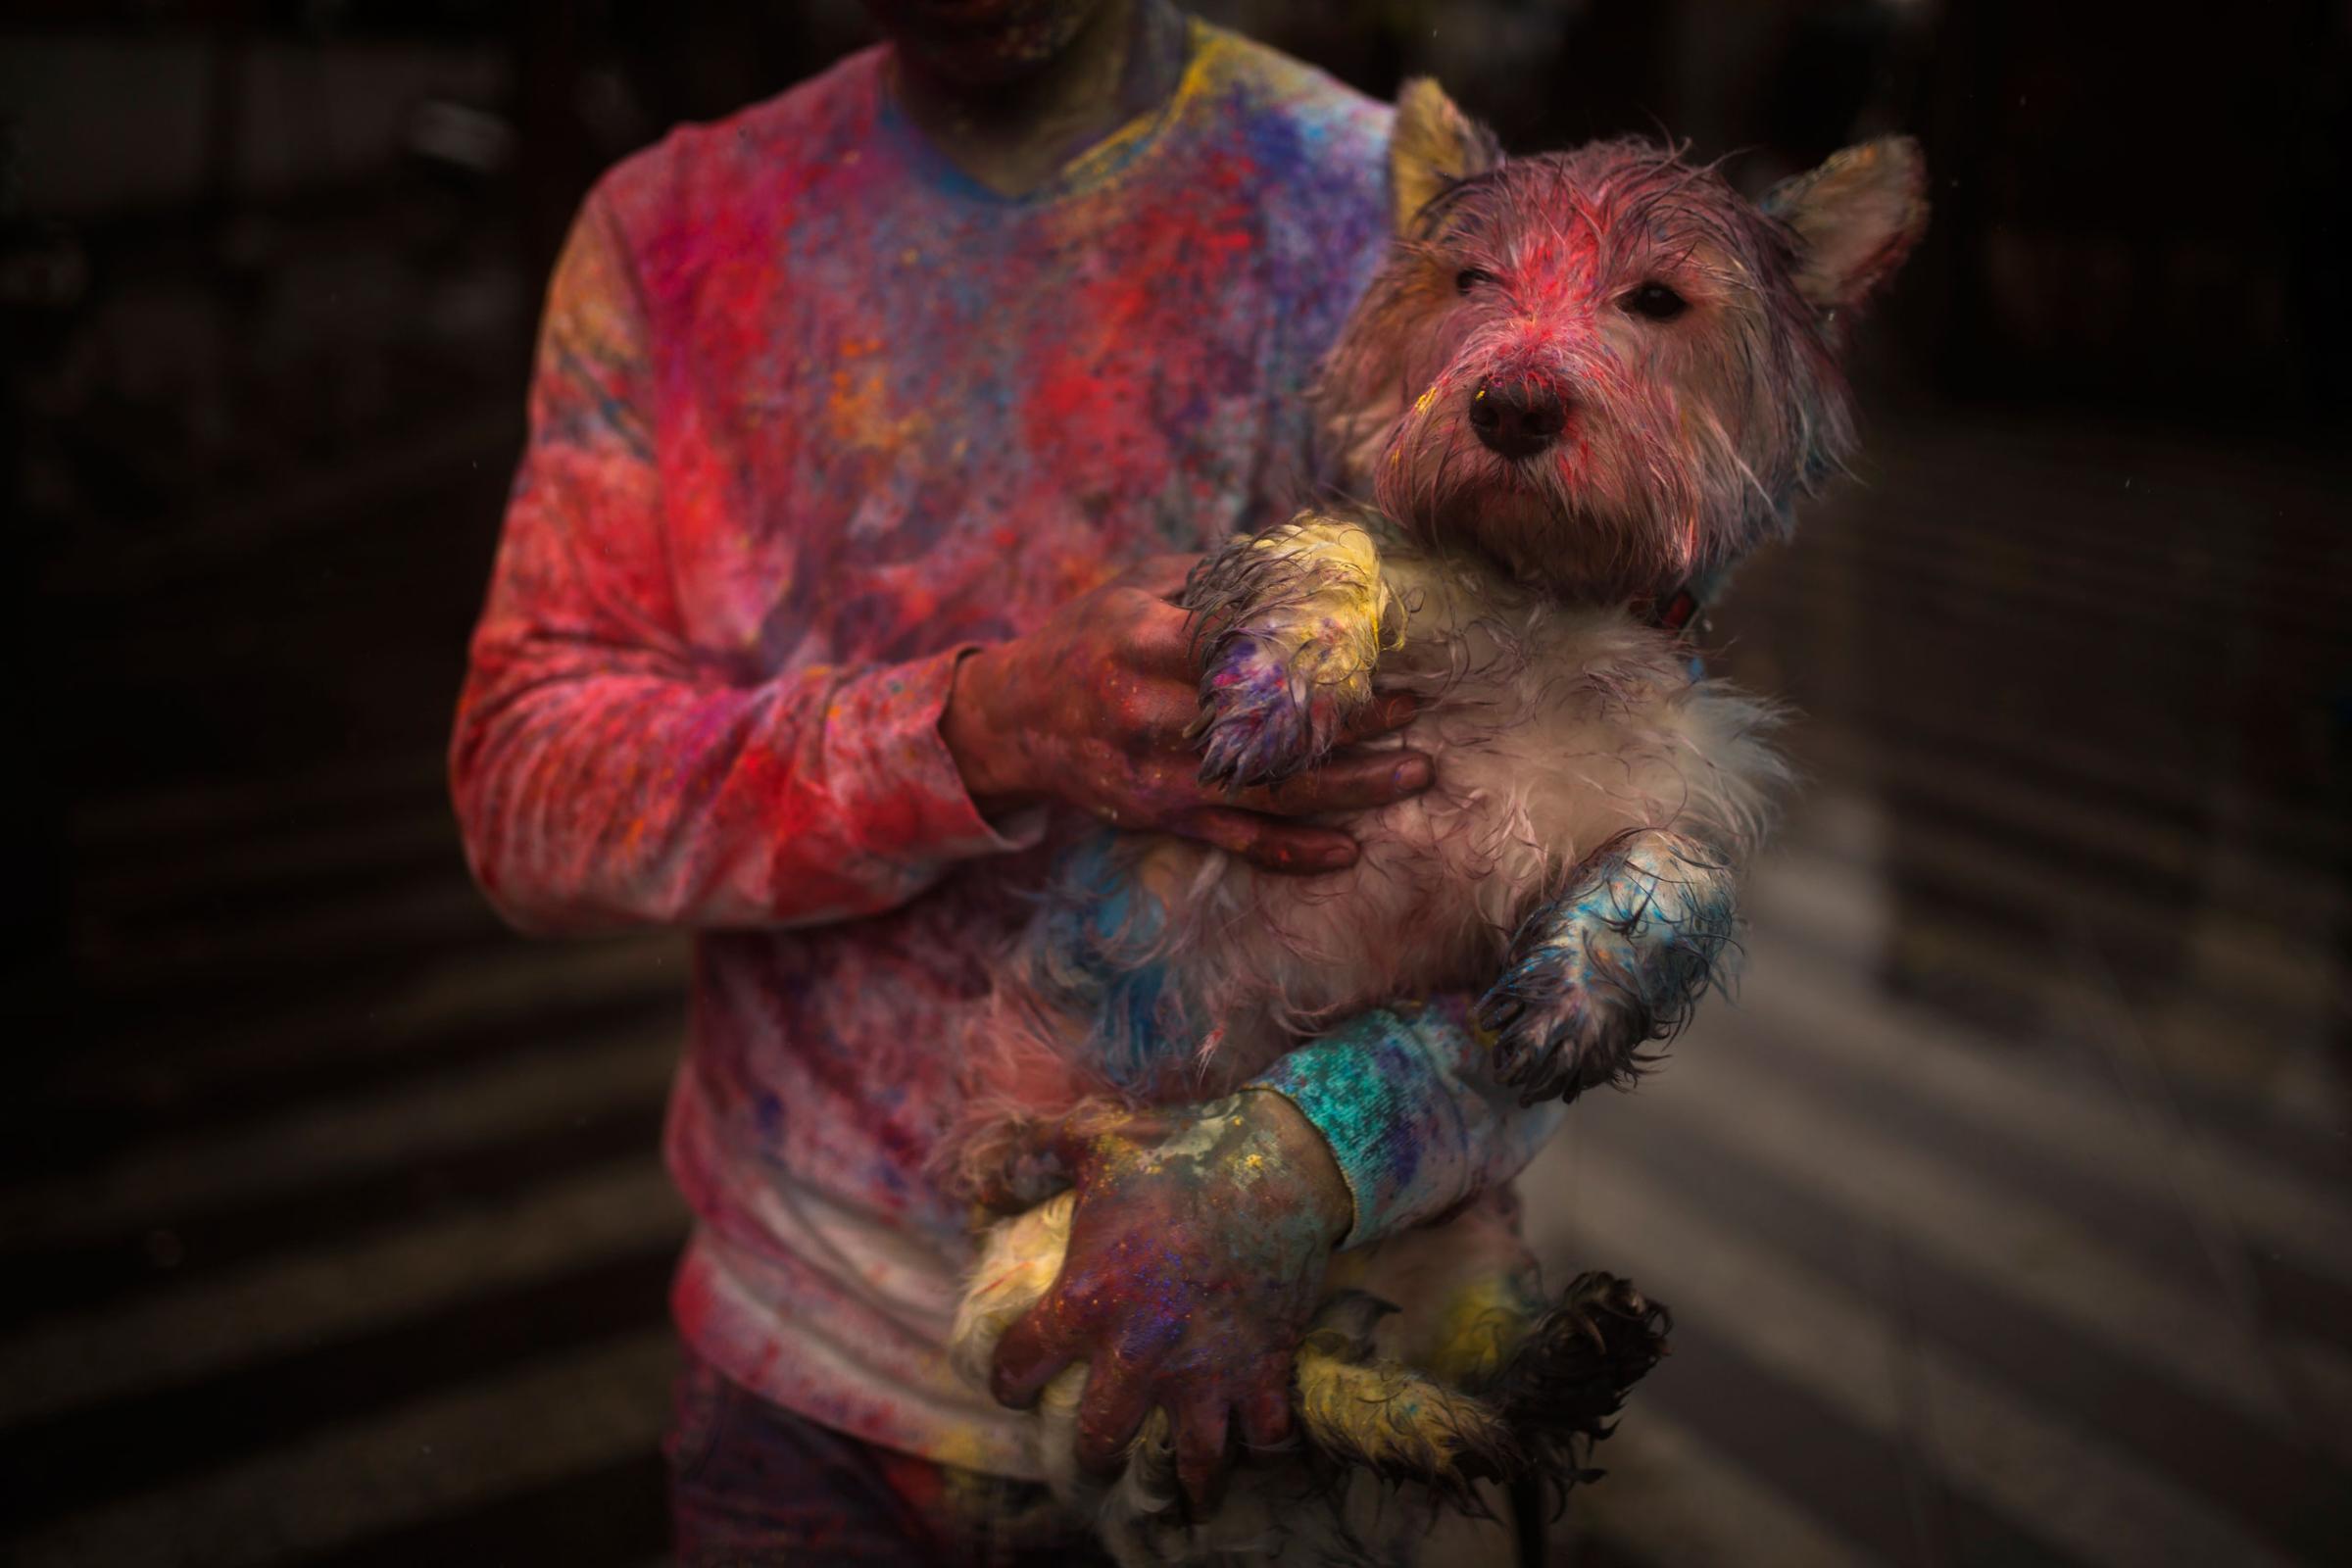 A reveler carries his dog during a Holi Festival in Madrid, Spain, April 26, 2015. The festival is based on the Hindu spring festival Holi, also known as the festival of colors where participants throw at each other dry powder and colored water.